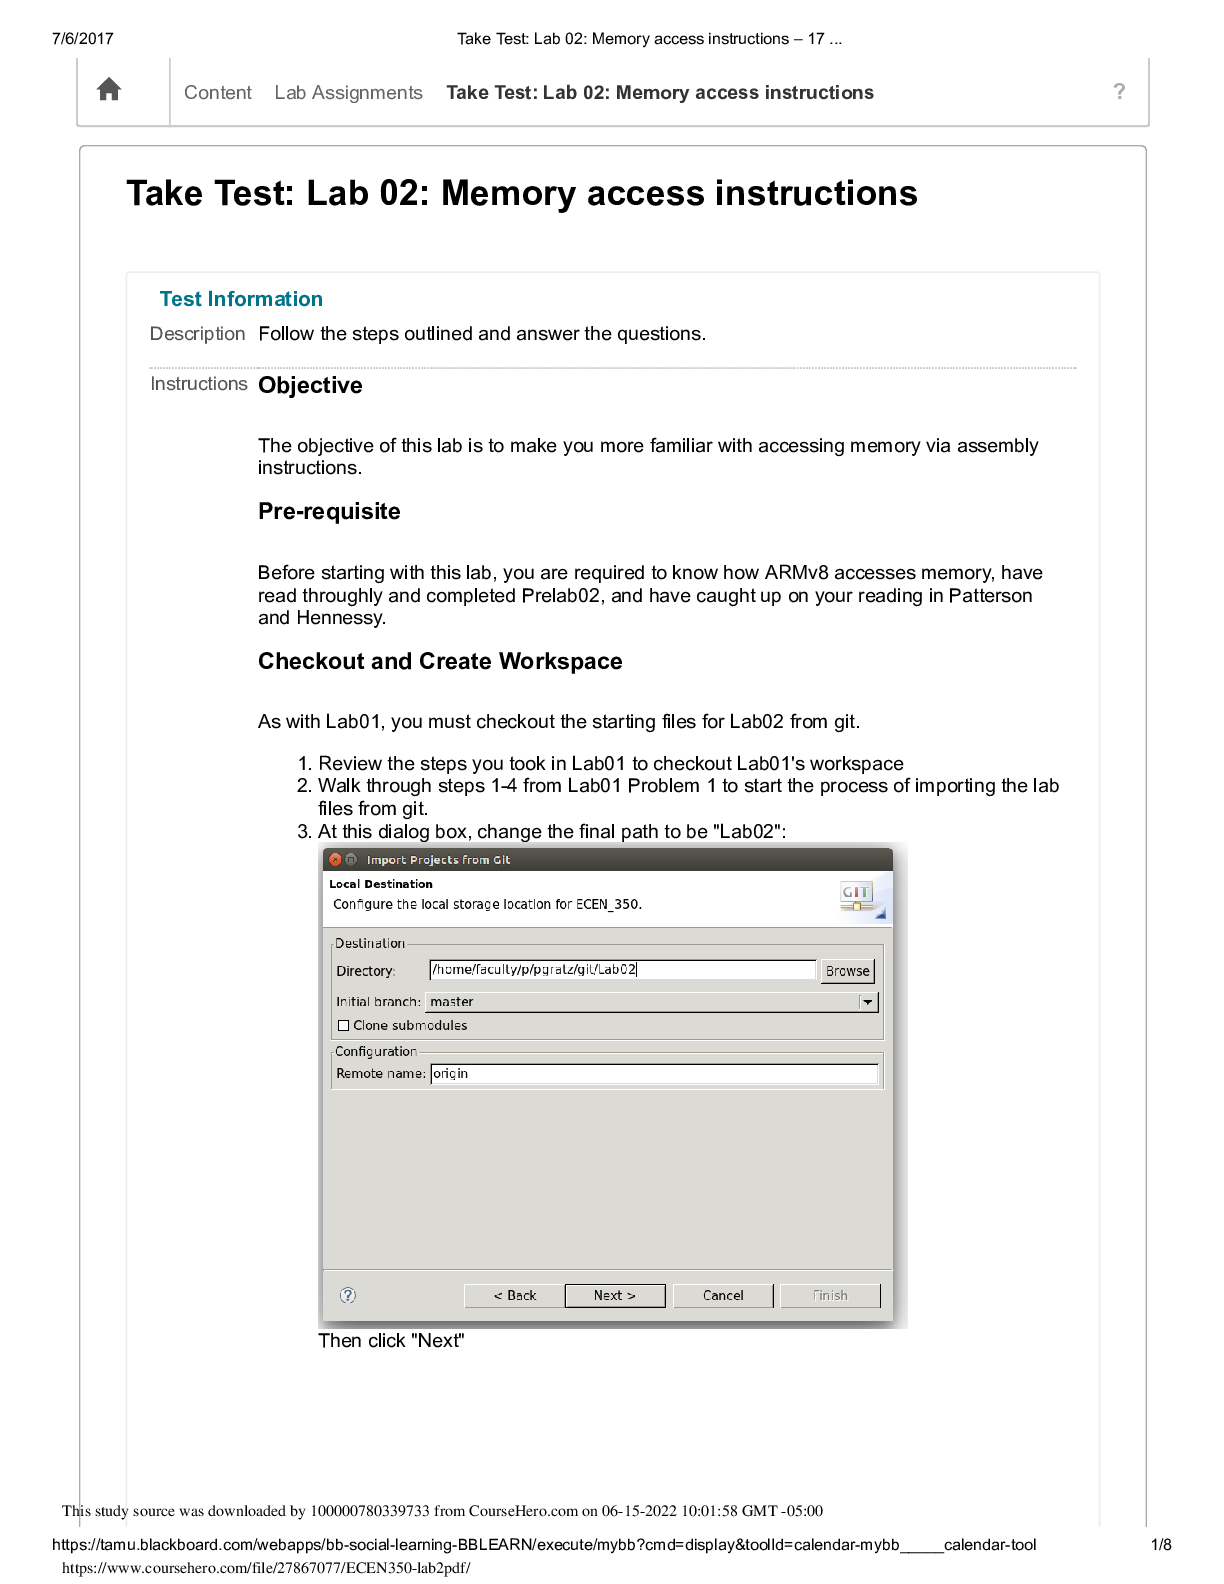 Memory access instructions Take Test  ECEN350 Lab 02